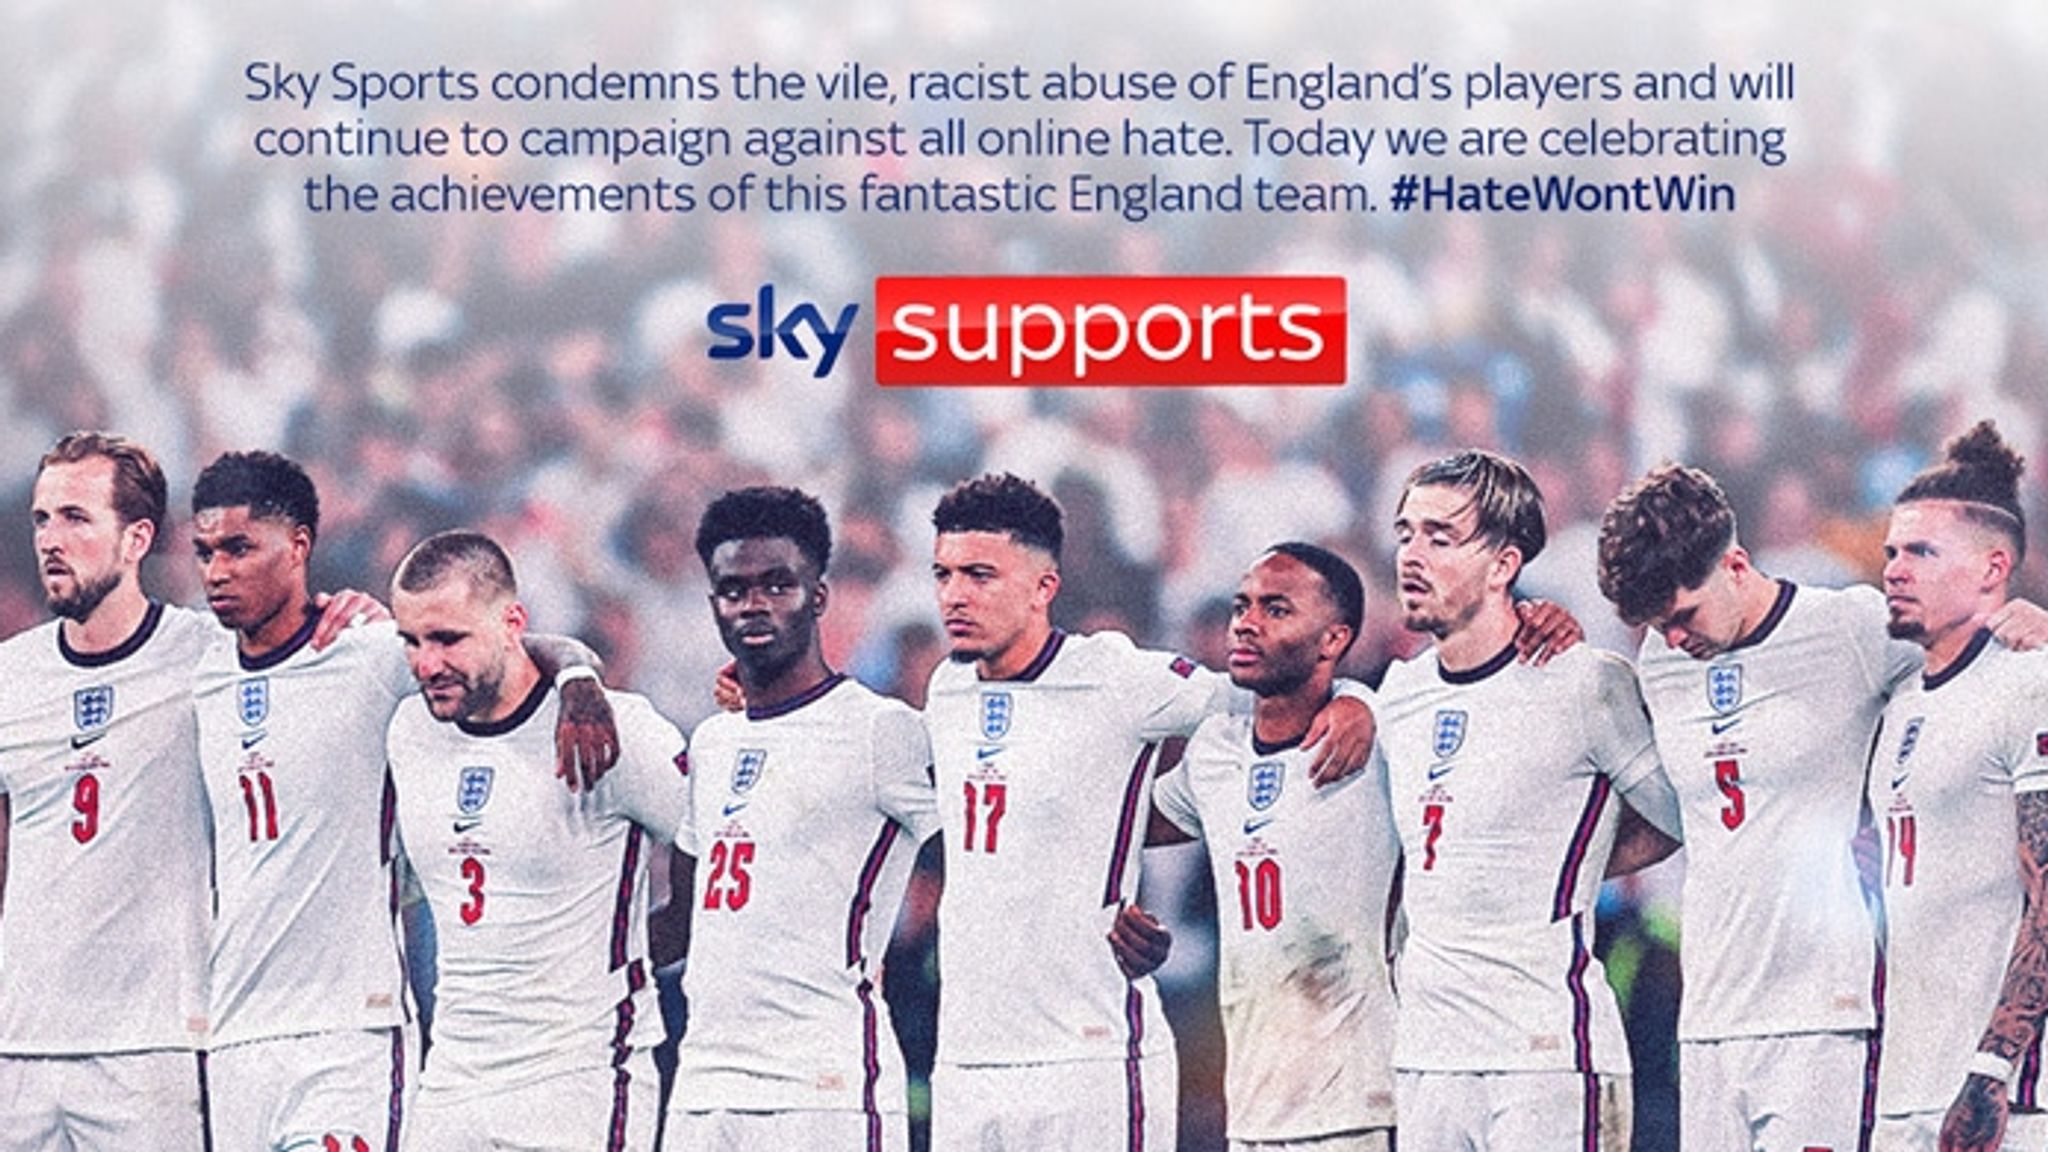 Sky Sports wins Best Social Media Campaign for Hate Wont Win at Broadcast Sports Awards News News Sky Sports